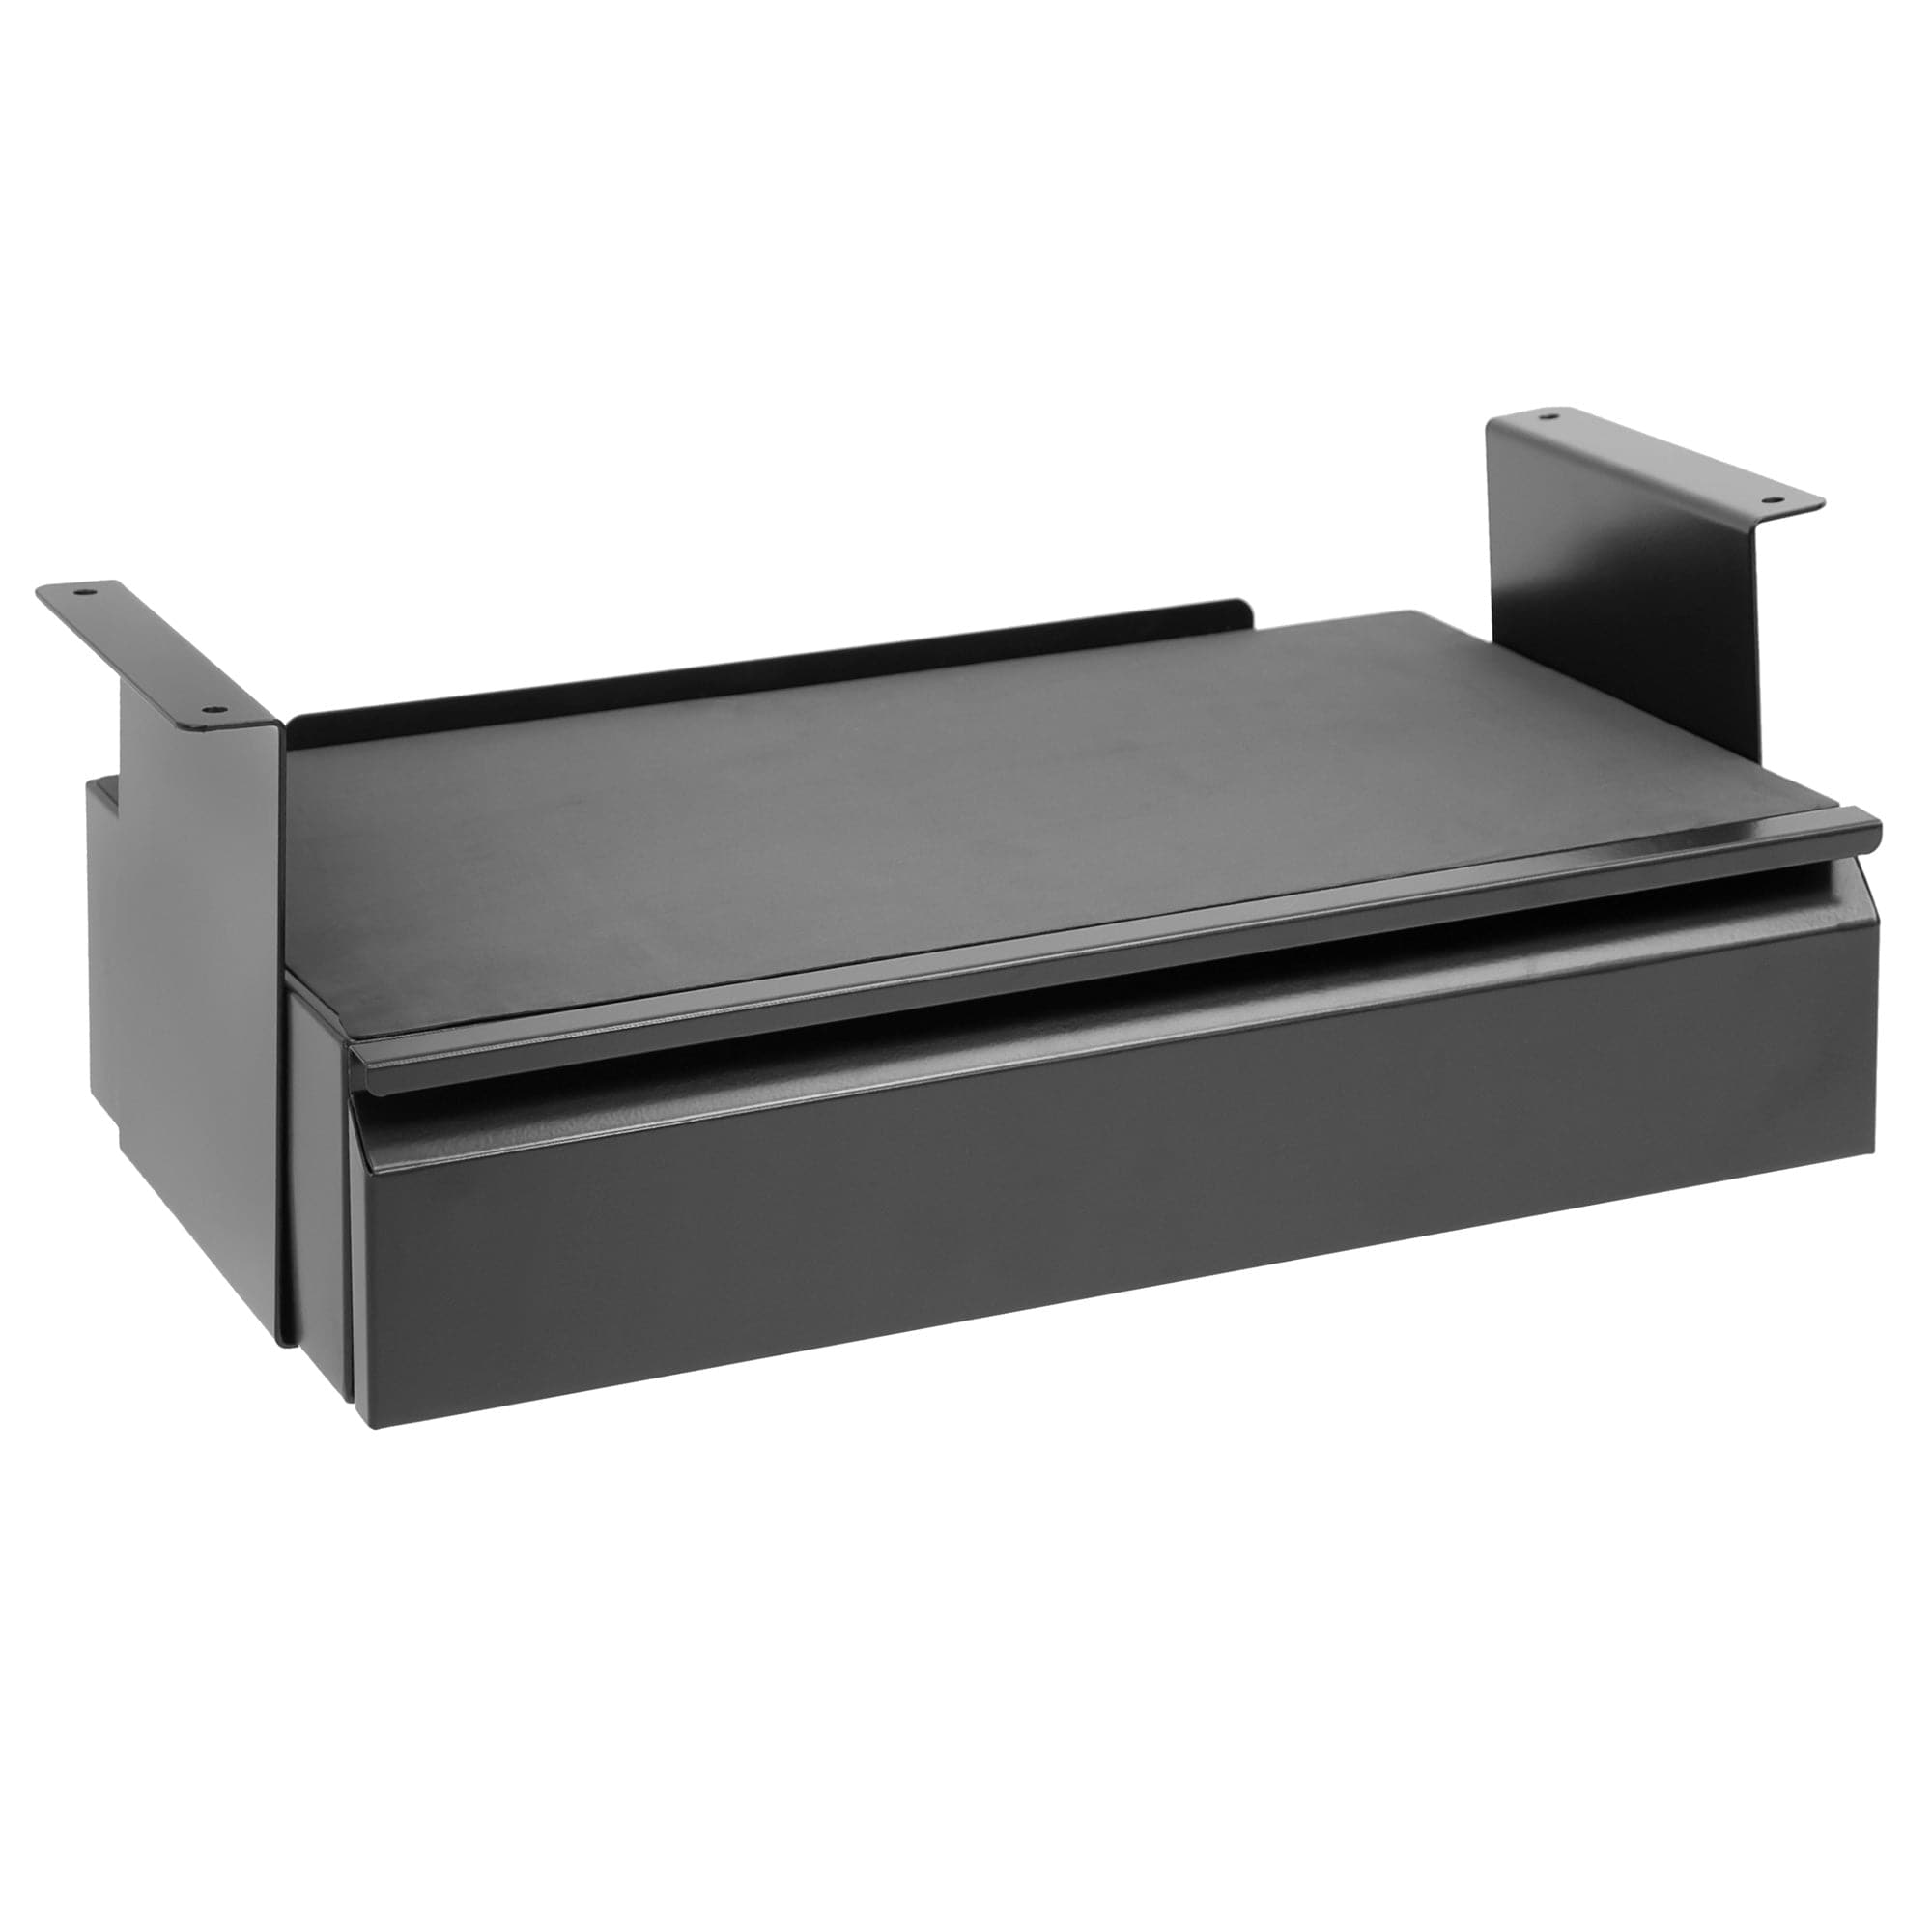 Under Desk Pull Out Drawer Kit With Shelf Mi 7291 Mount It